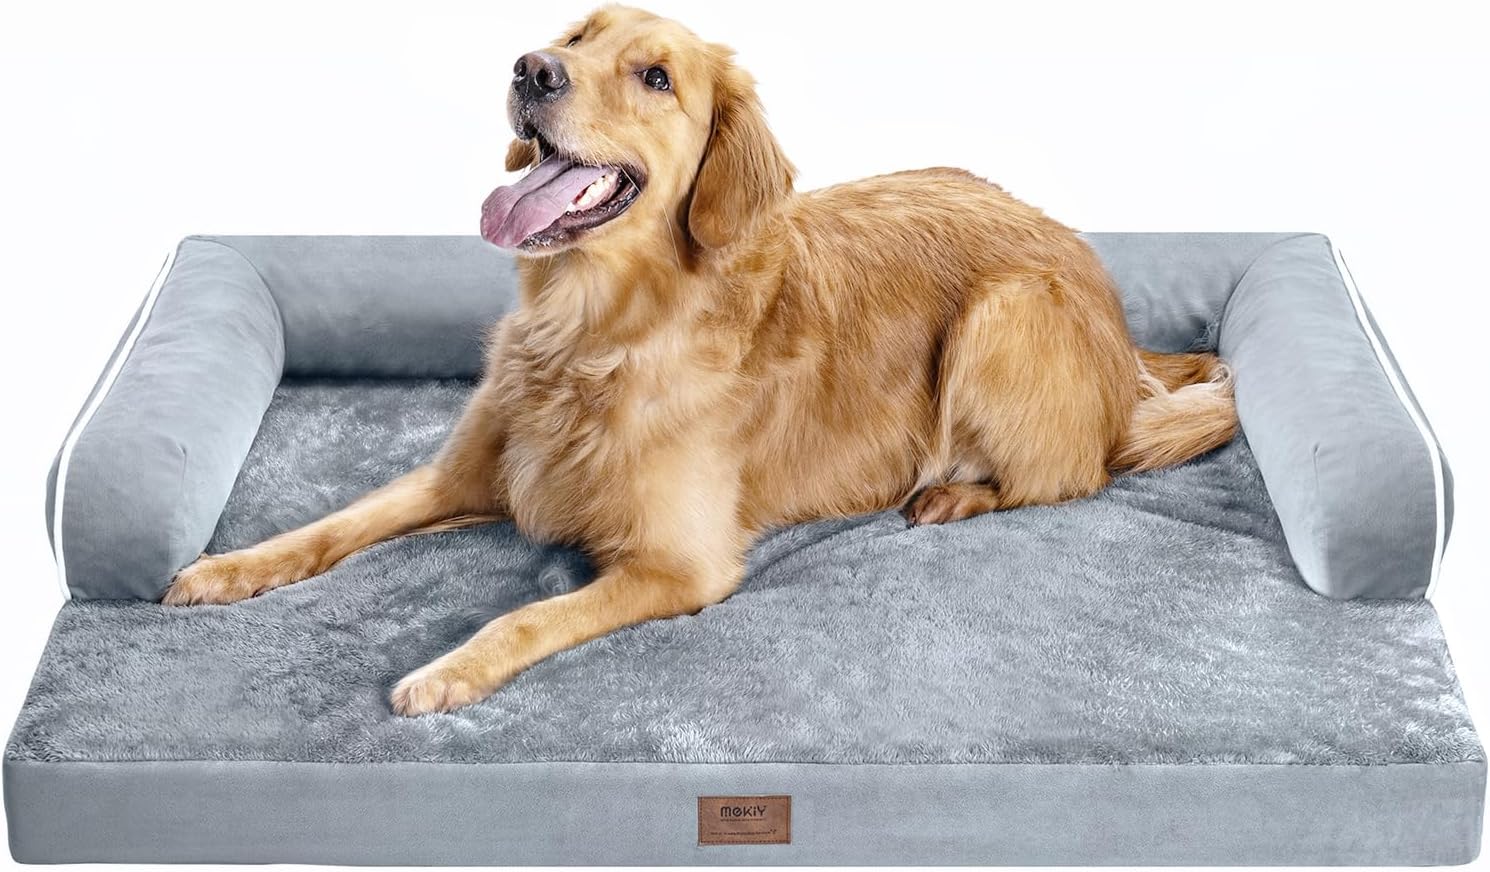 Large Dog Bed Orthopedic Washable - Beds Bolster - Medium XL XLarge Big Dogs - Memory Foam Couch Sofa - Waterproof with Removable Cover